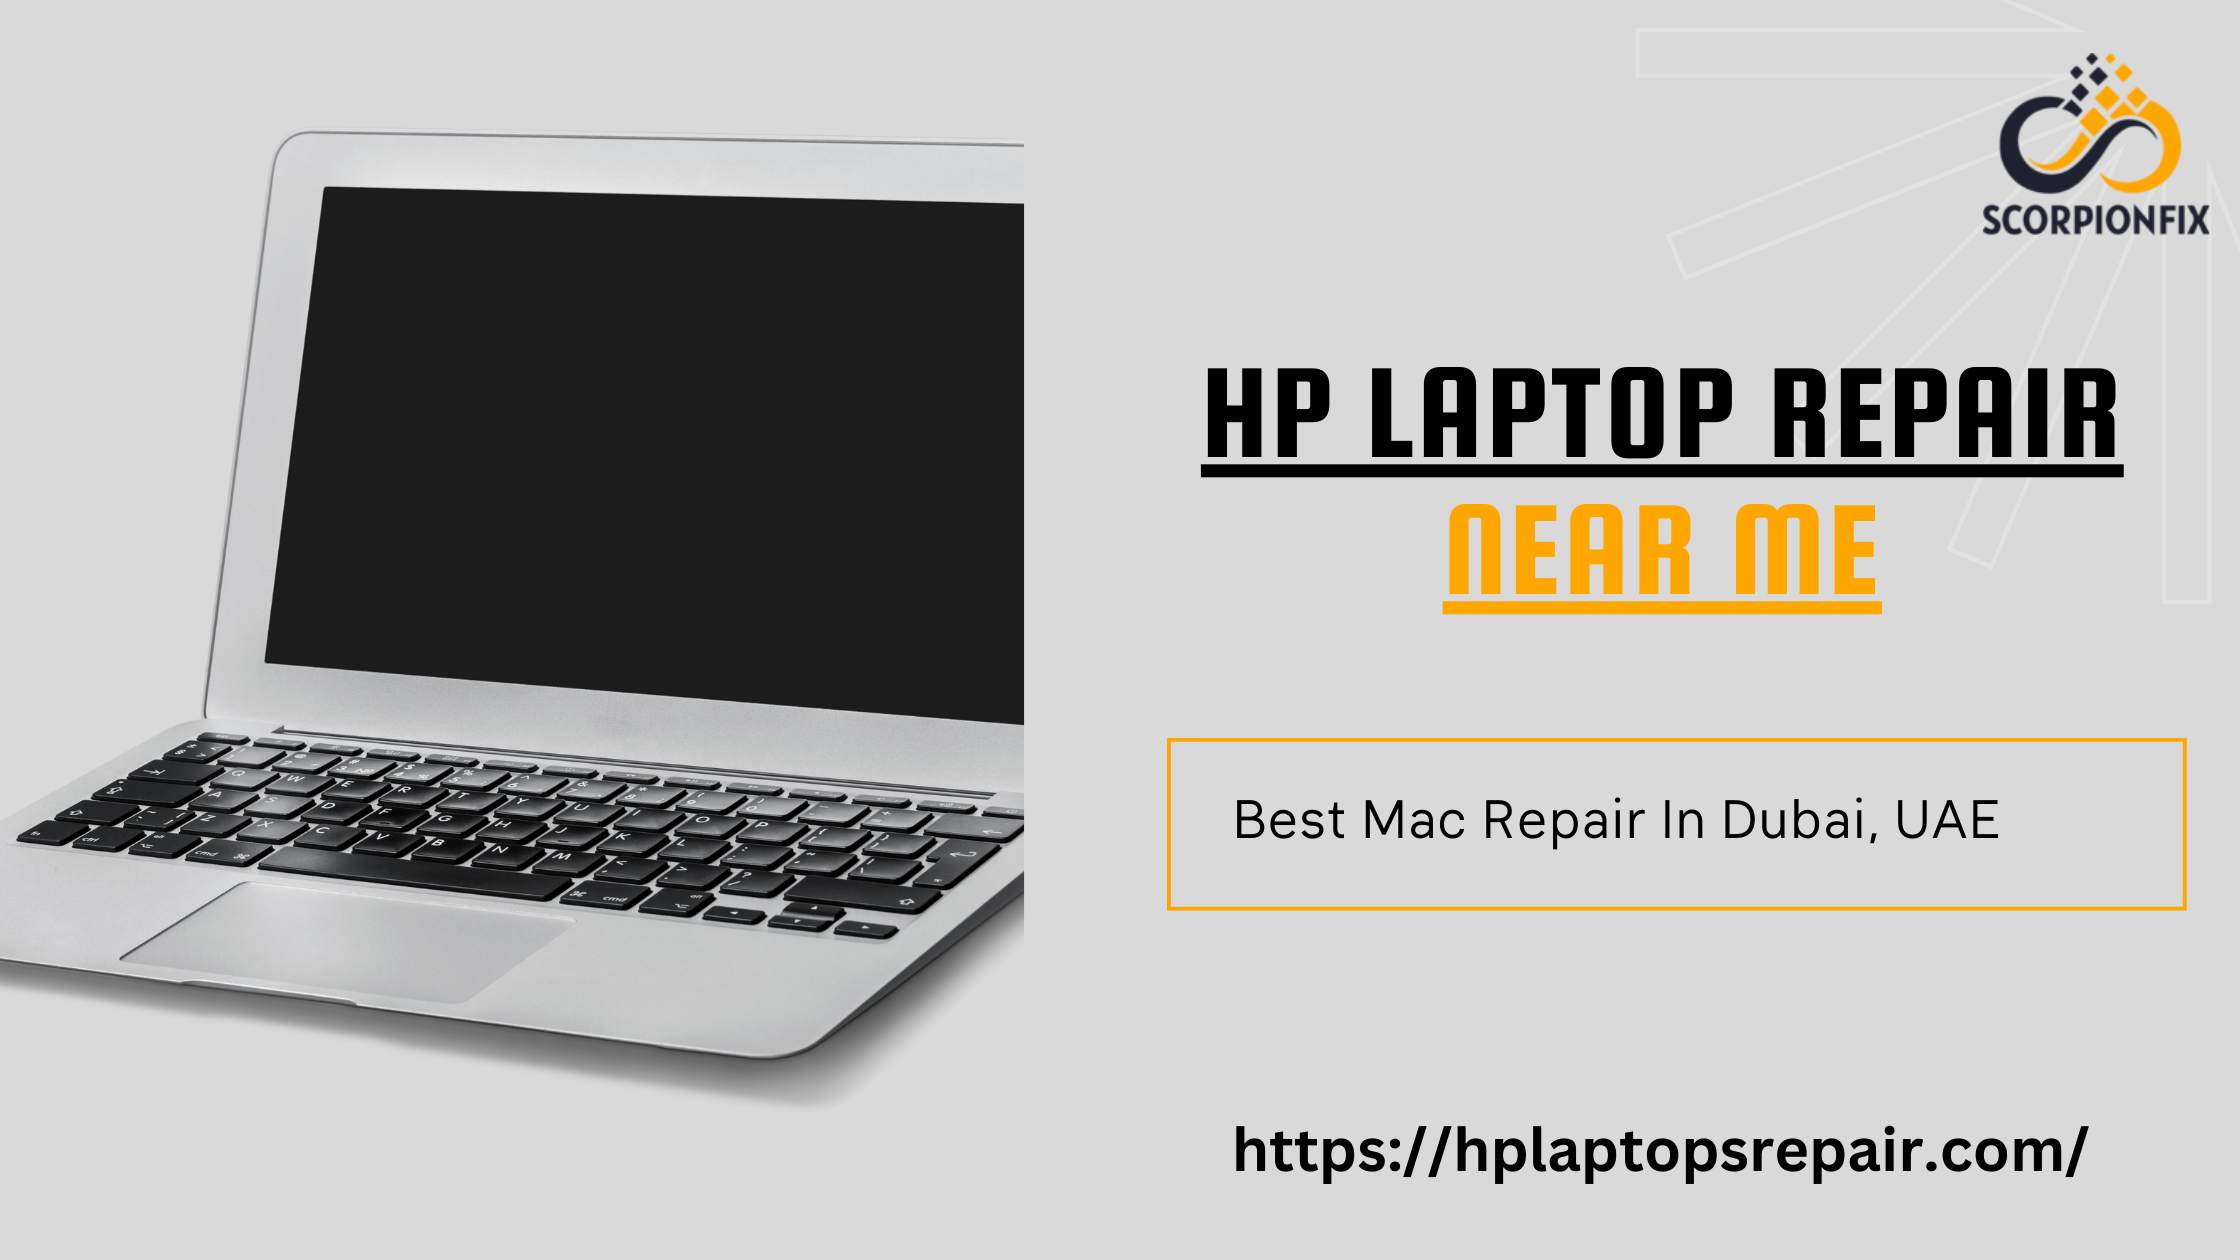 Finding Reliable HP Laptop Repair Services Near Me: Guide